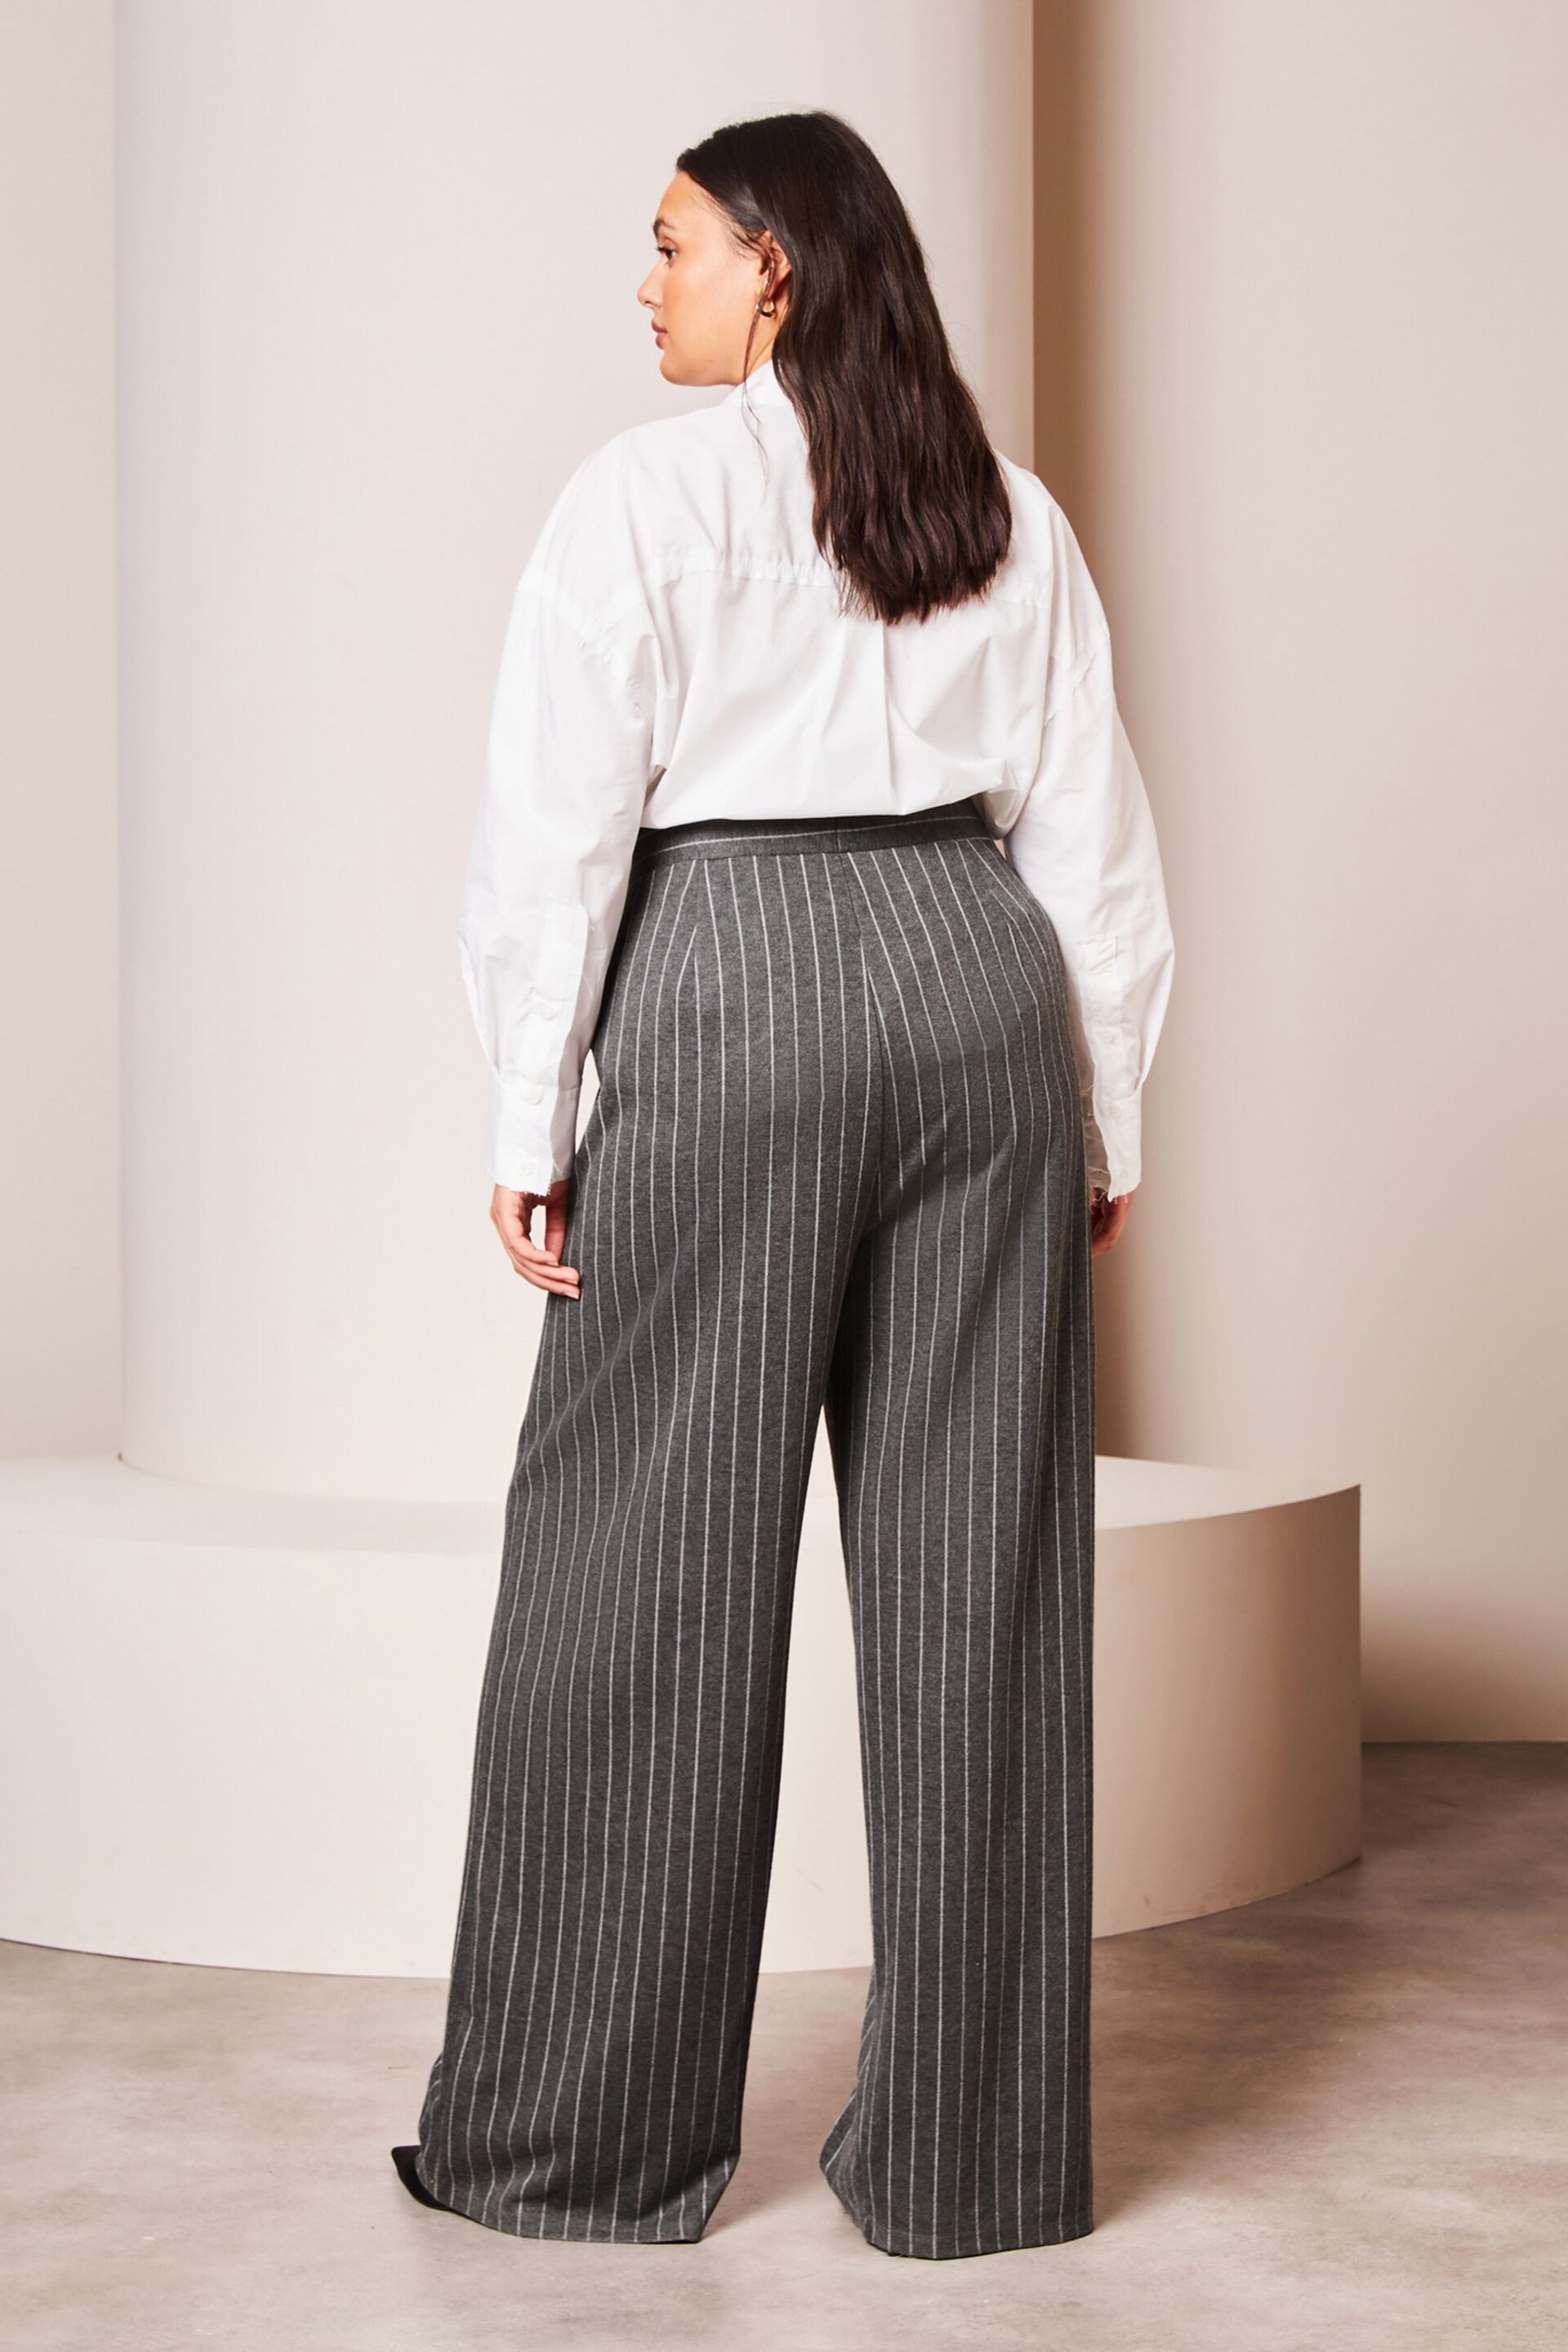 Lipsy Grey Pinstripe Curve High Waist Wide Leg Tailored Trousers - Image 2 of 4